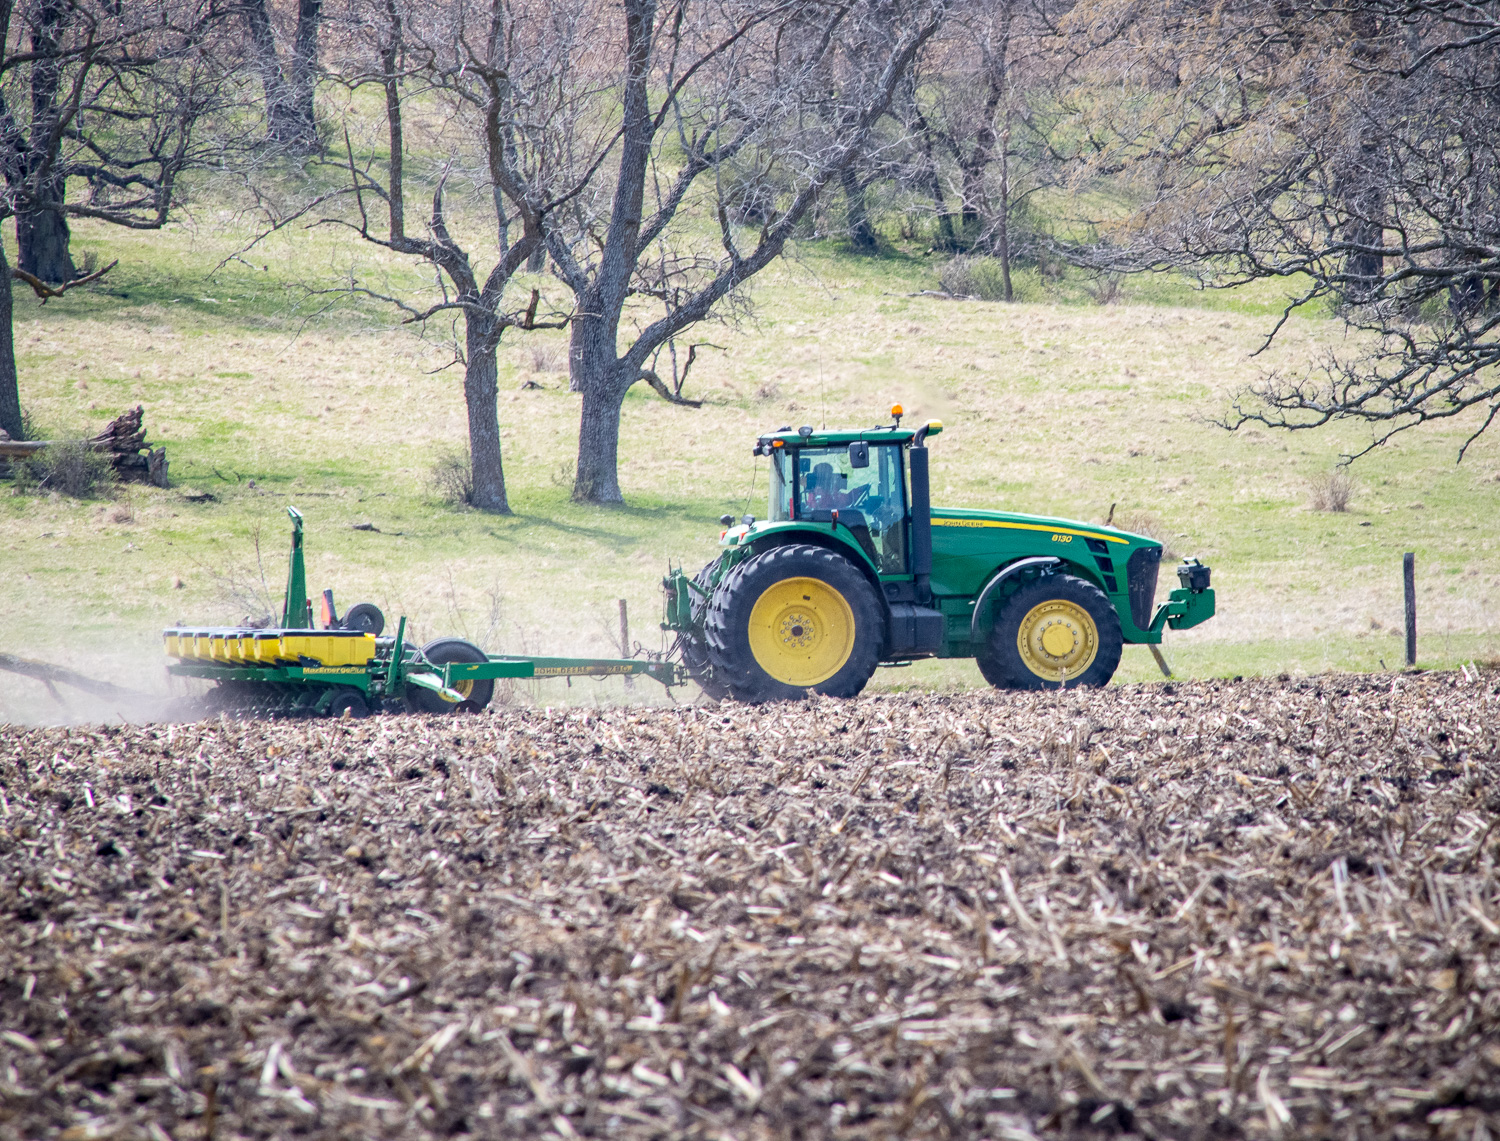 A tractor pulls a planter across the field